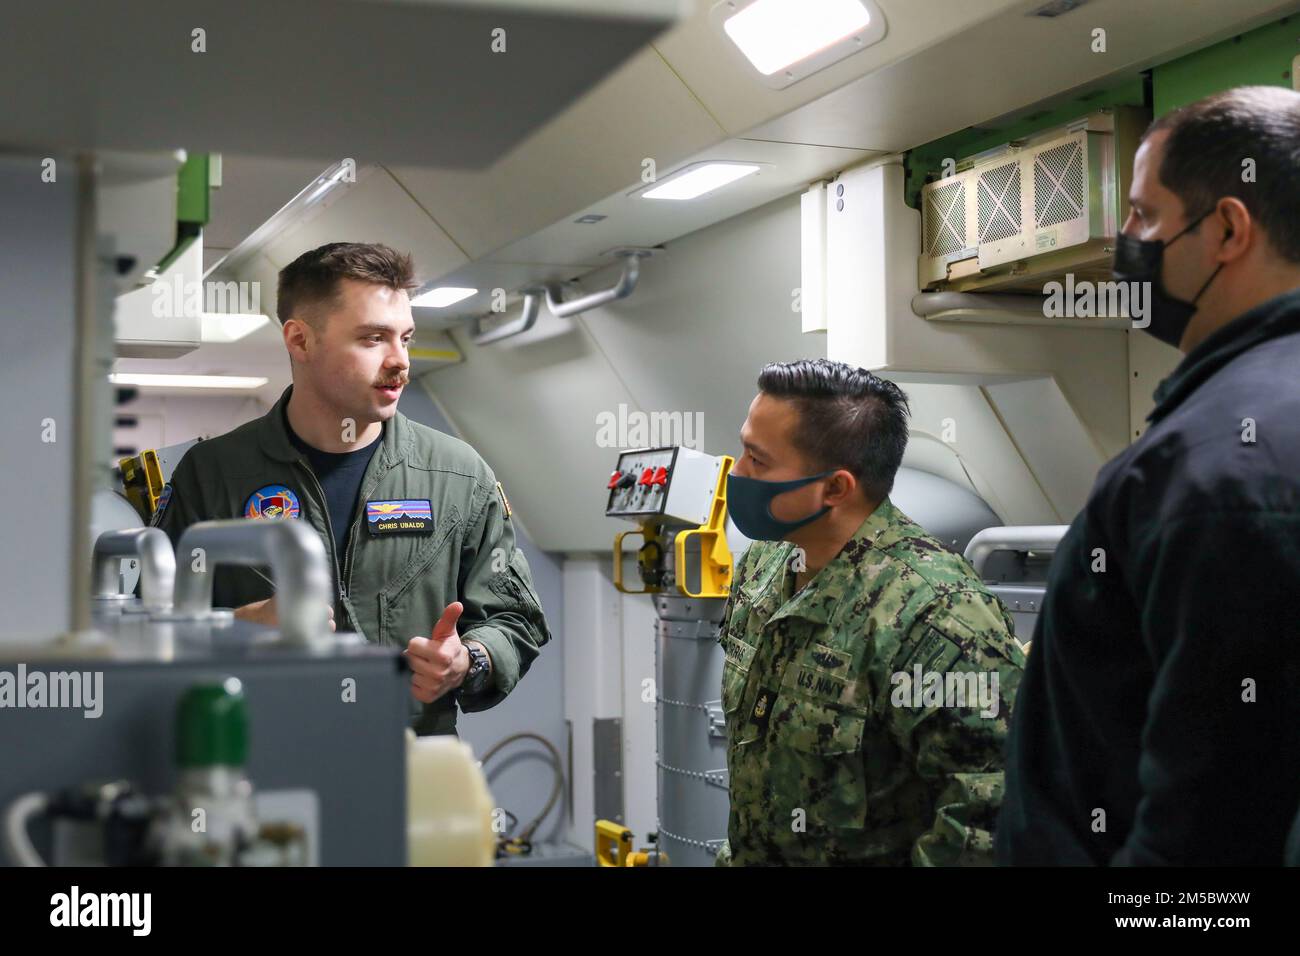 NAVAL AIR FACILITY ATSUGI, Japan (Feb. 24, 2022) –  Naval Air Crewman (Operator) 2nd Class Chris Ubaldo, from Goshen, Indiana, assigned to the “Golden Swordsmen” of Patrol Squadron (VP) 47, gives a tour to personnel from Commander, Submarine Group (CSG) 7 while aboard a P-8A Poseidon familiarization flight, Feb. 24. VP-47 is currently deployed to NAF Misawa, Japan conducting maritime patrol and reconnaissance and theater outreach operations within the U.S. 7th Fleet (C7F) area of operations in support of Commander, Task Force 72, C7F, and U.S. Indo-Pacific Command objectives throughout the reg Stock Photo